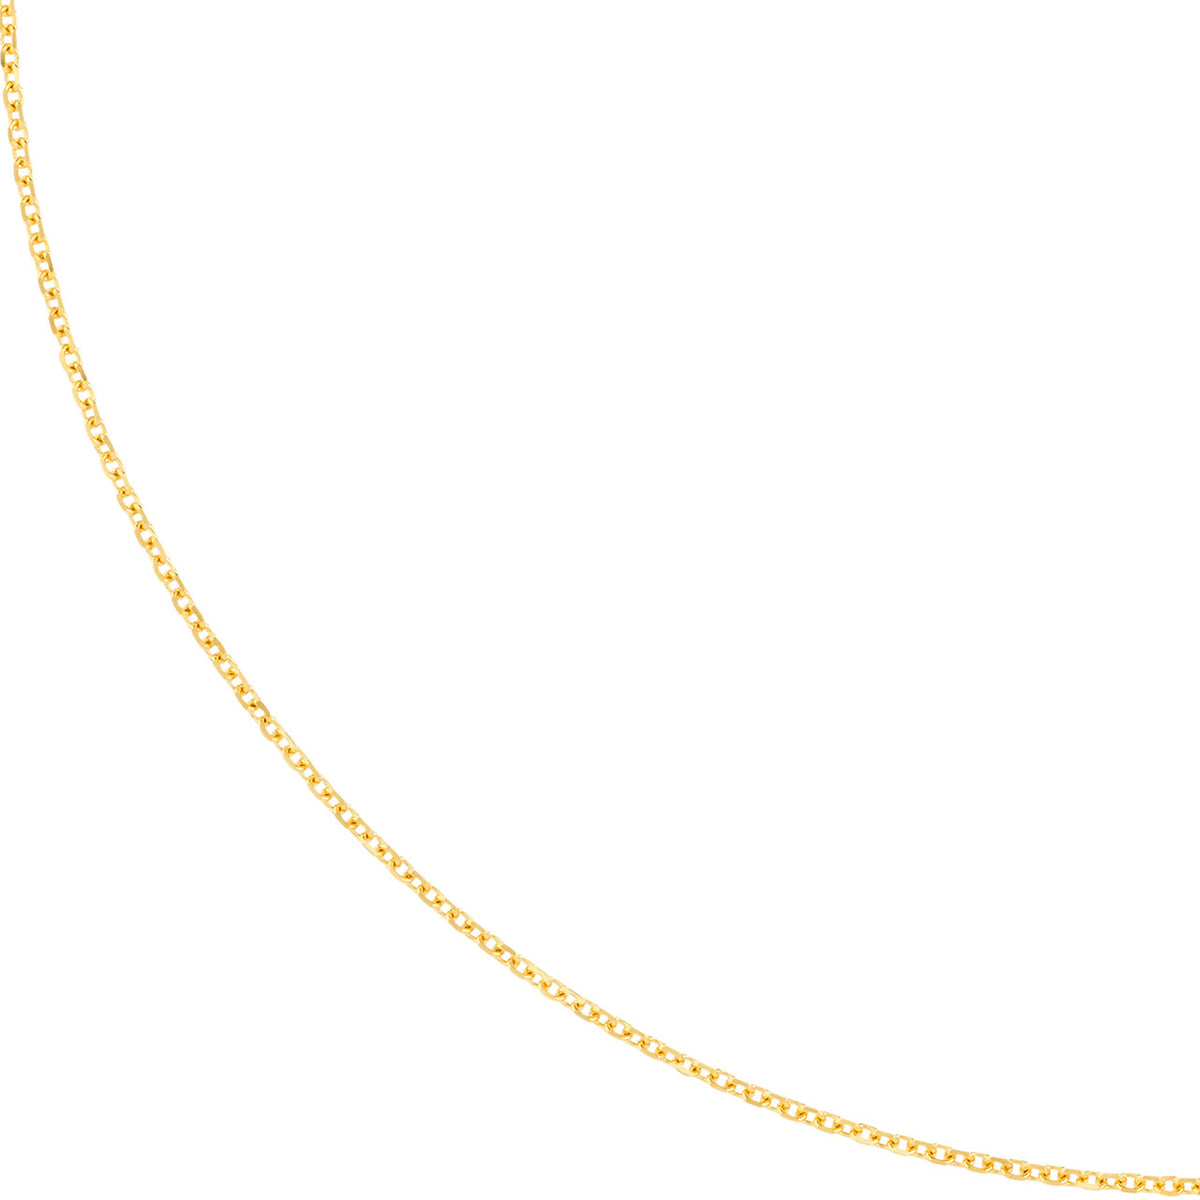 14K Yellow Gold 1.05mm D/C Cable Chain Necklaces with Lobster Lock